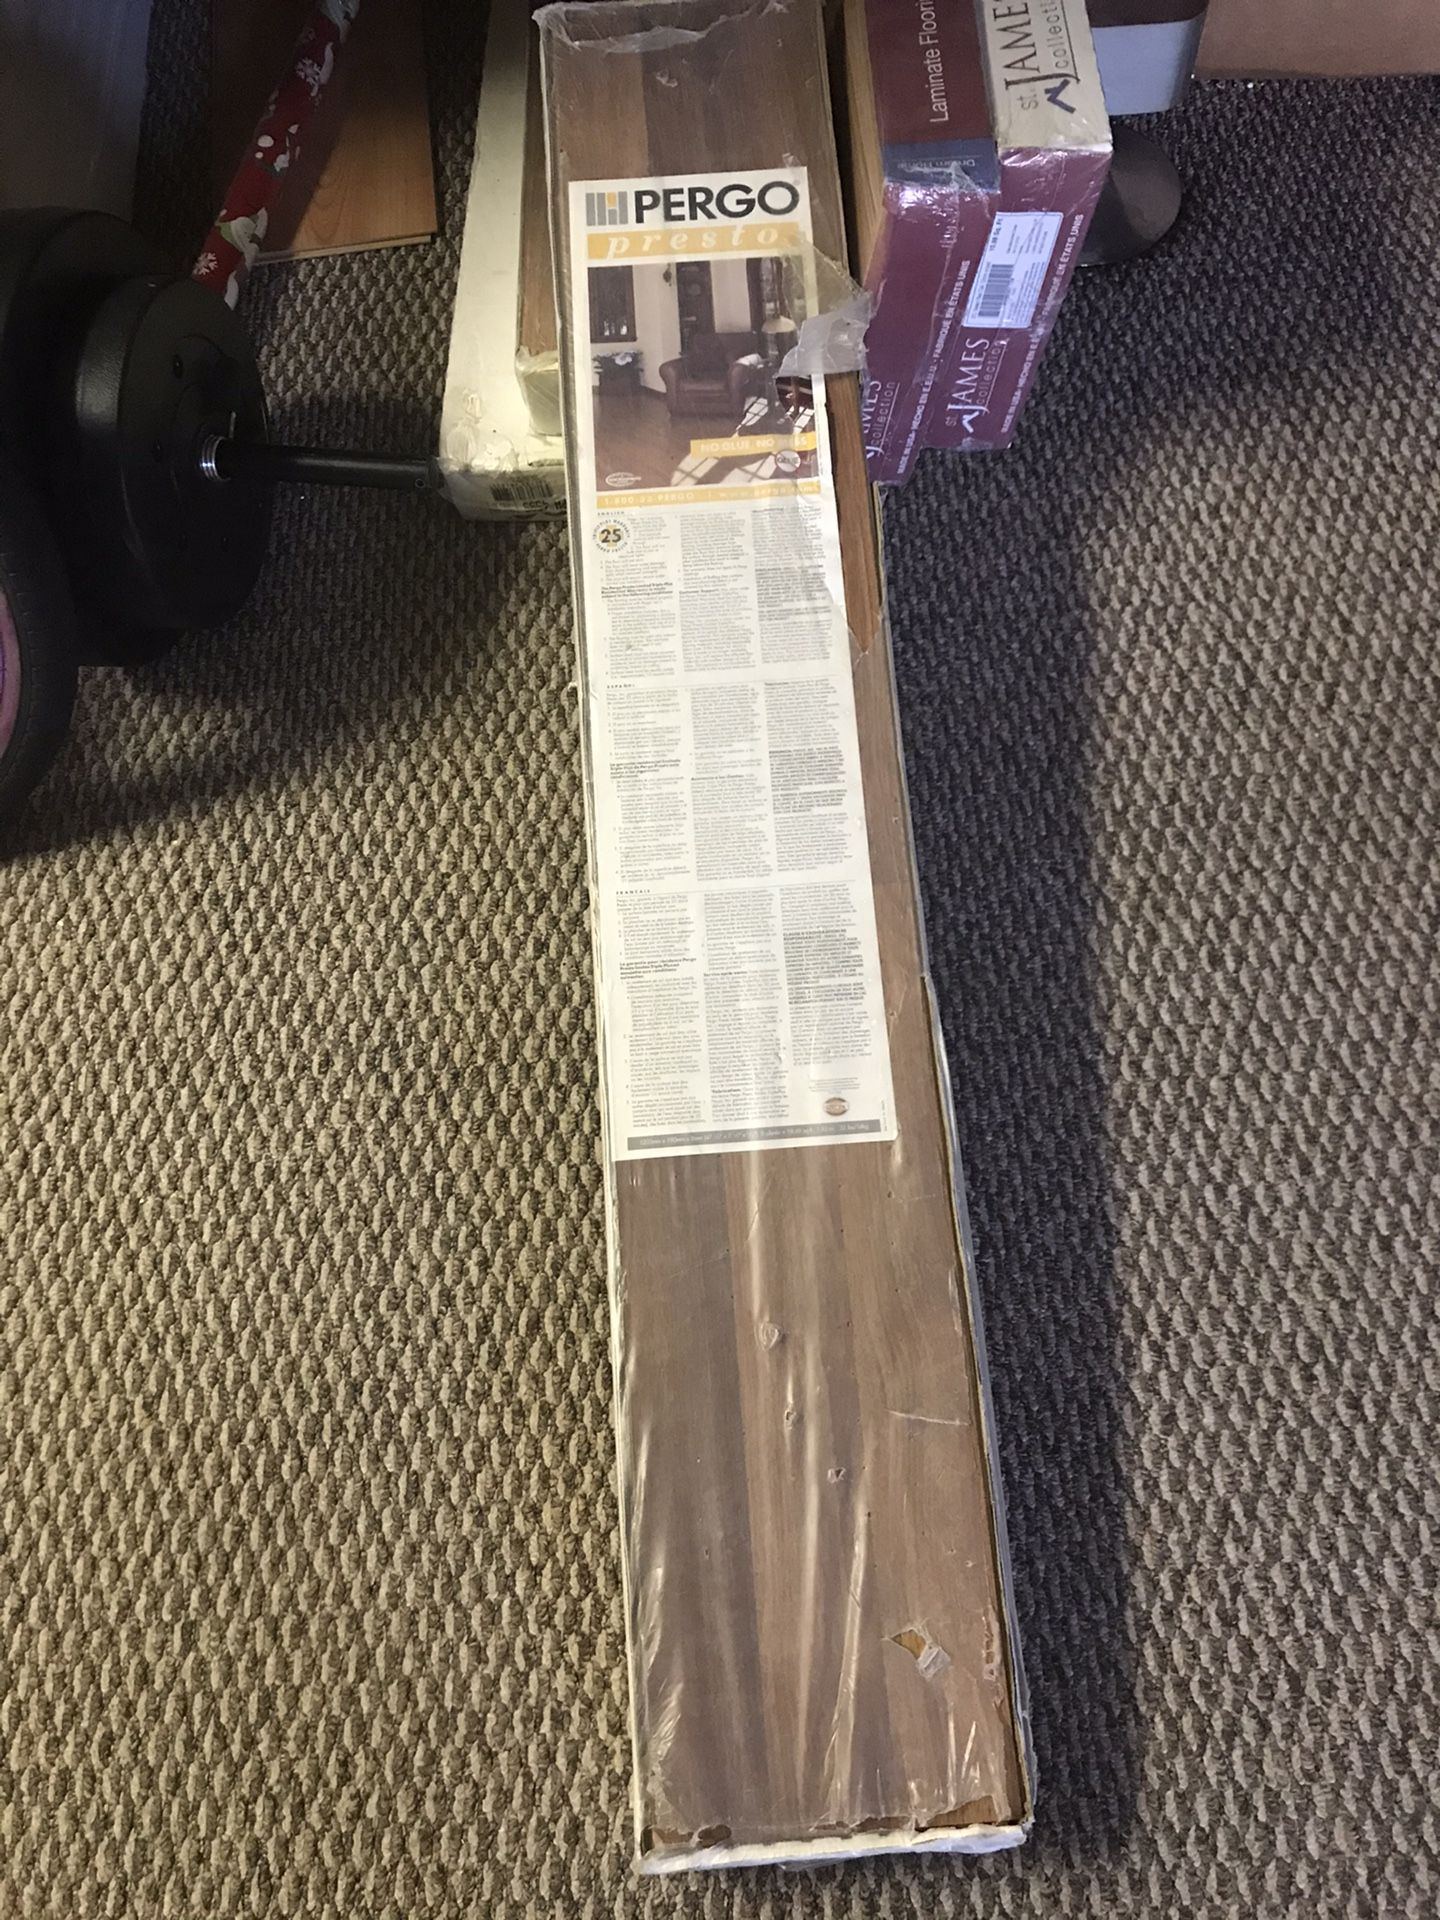 Pergo Presto Laminate Flooring. 4 Cases. Brand New and one Opened case. Take that one free.